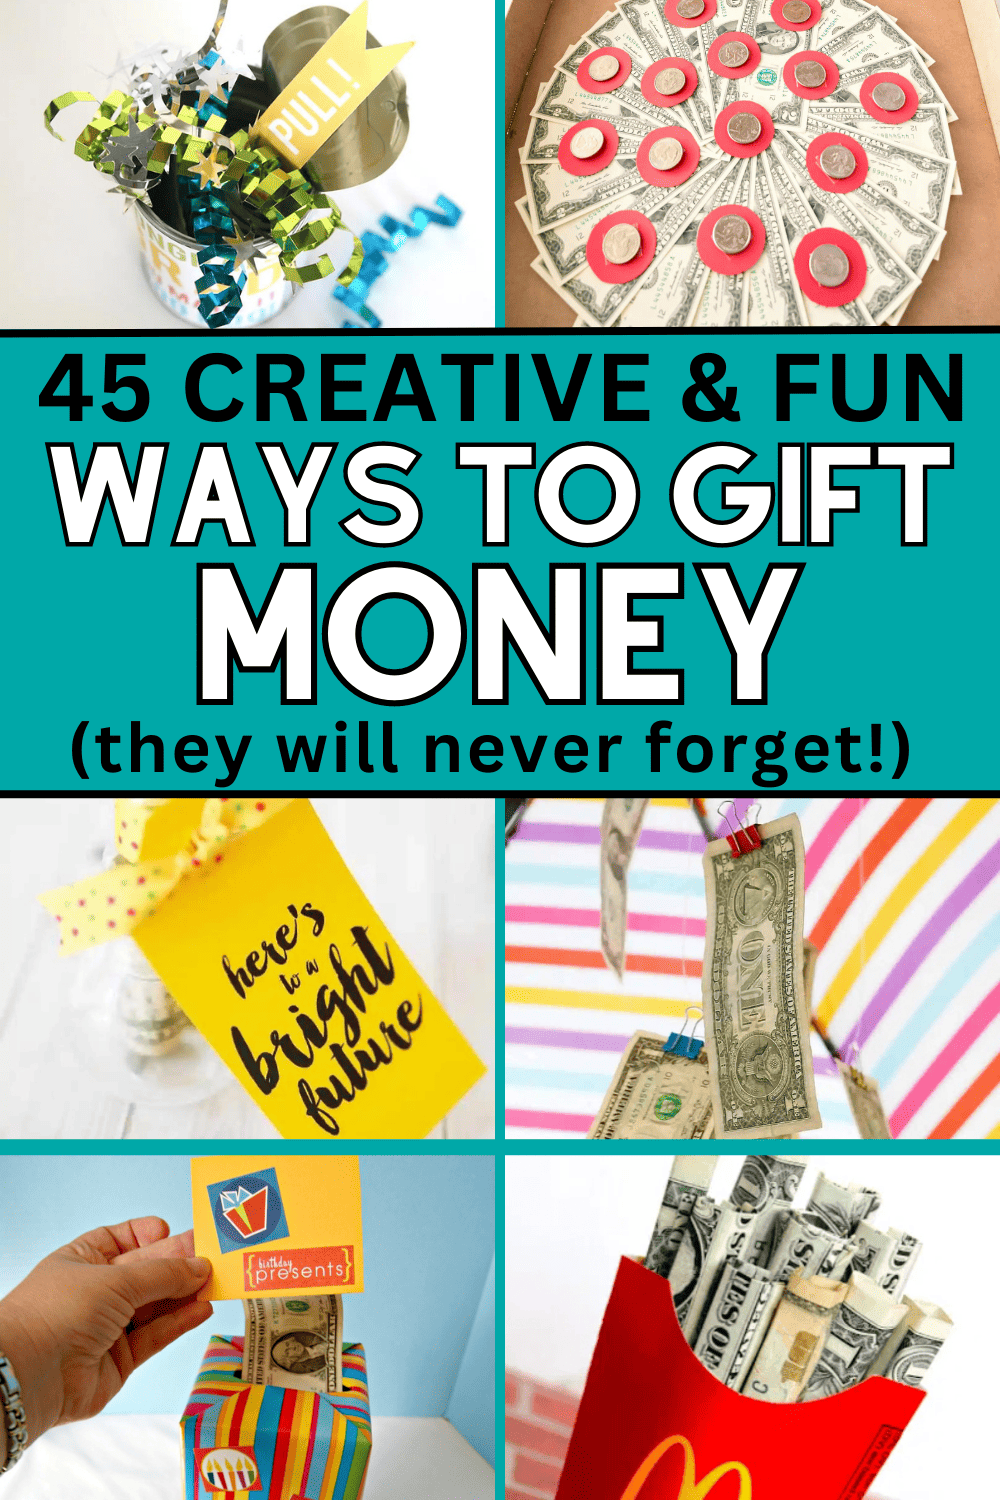 Fun Gift Card Holder Idea You Can DIY For a Birthday Surprise